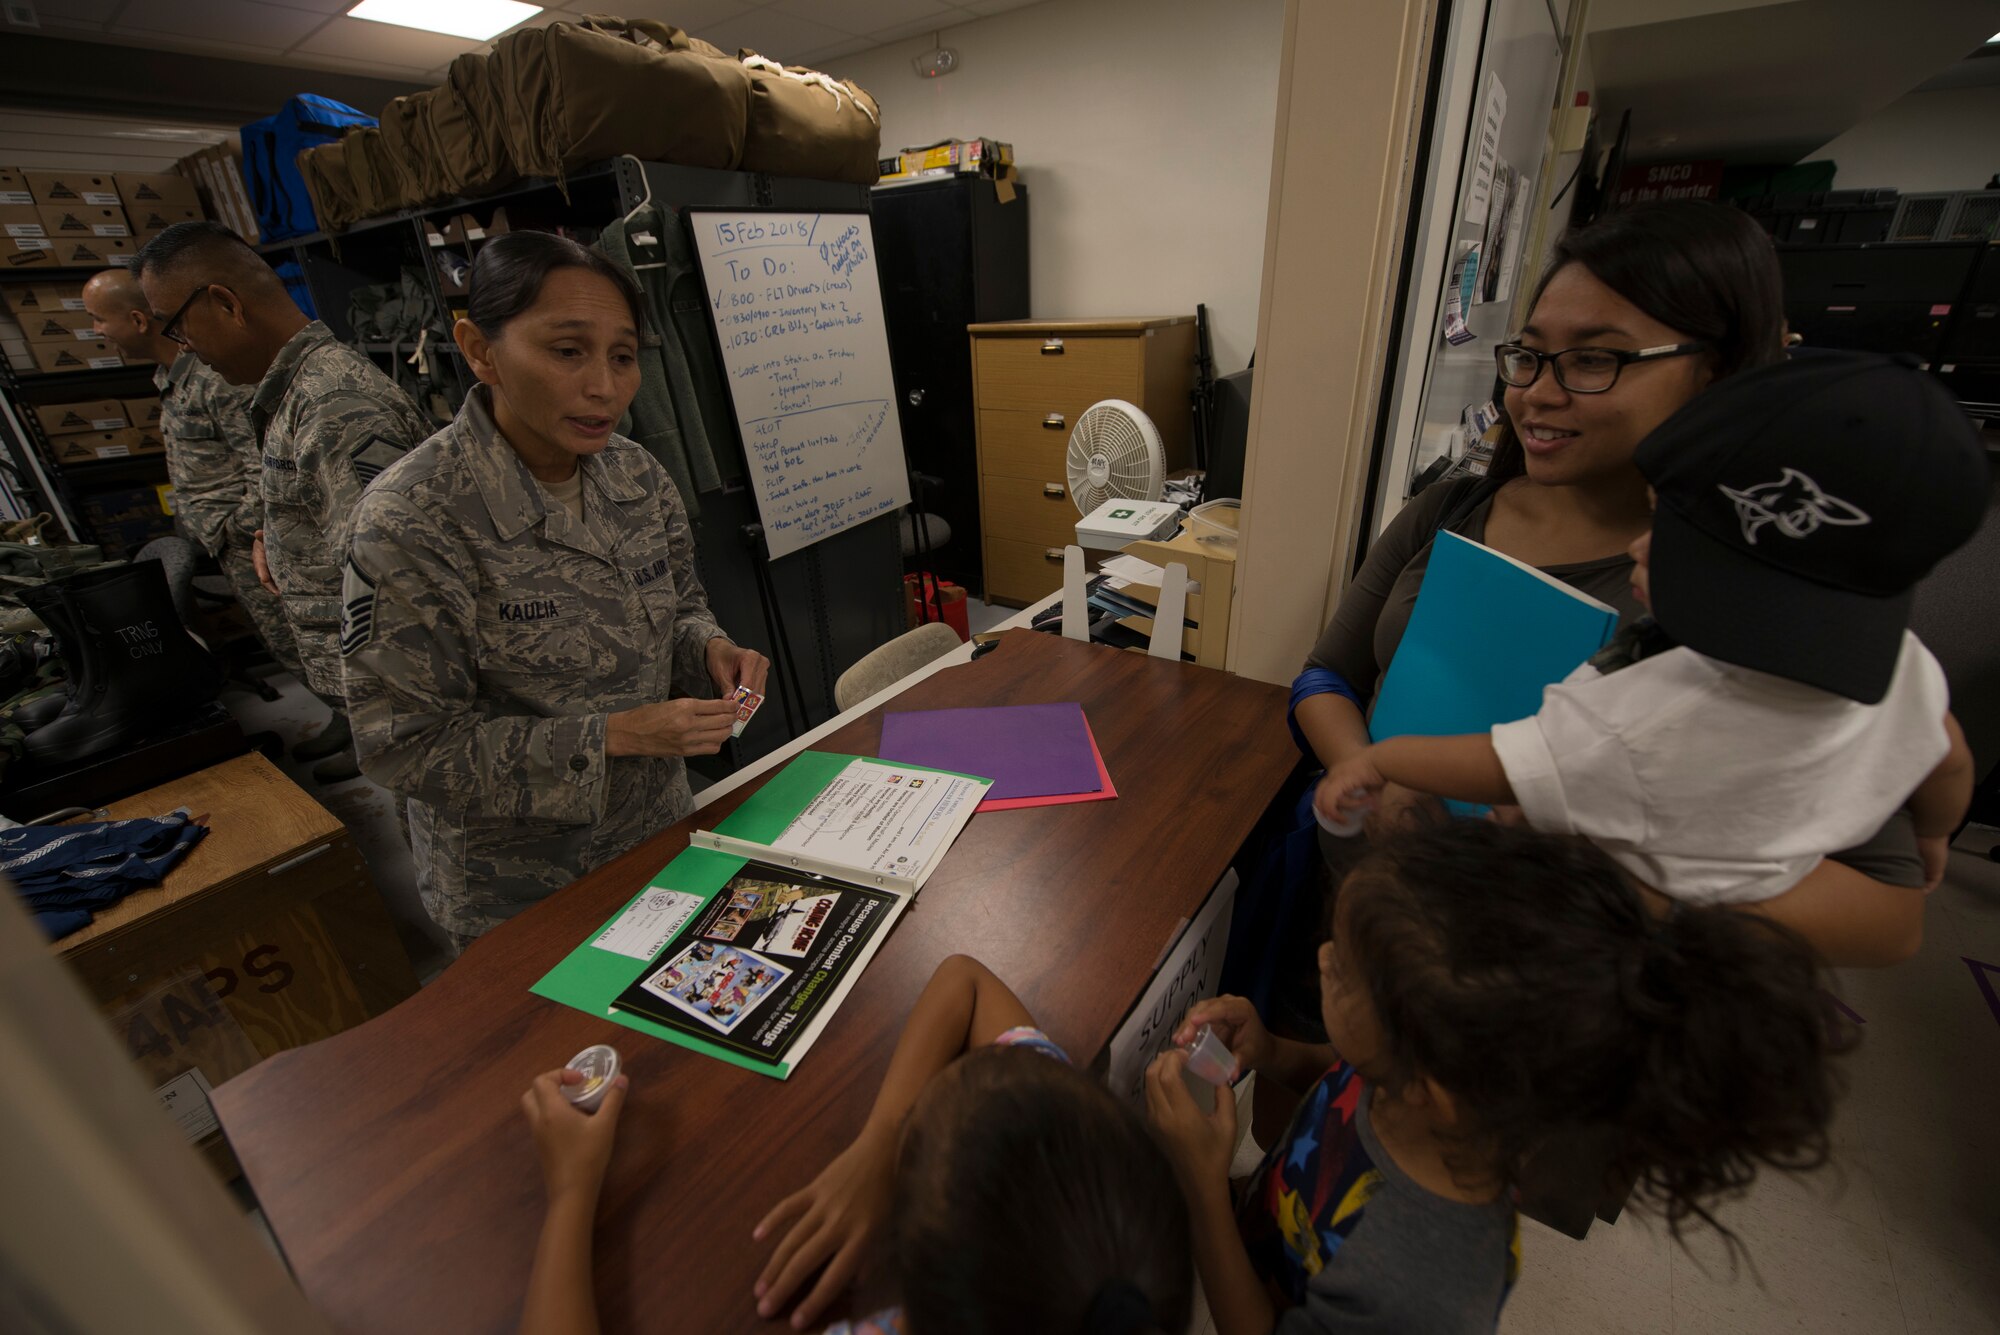 U.S. Air Force Master Sgt. Mary Kaulia, assigned to the U.S. Air Force Reserve’s 44th Aerial Port Squadron, introduces military children to readiness activities during Operation Inafa’ Maolek at Andersen Air Force Base, May 5, 2018.